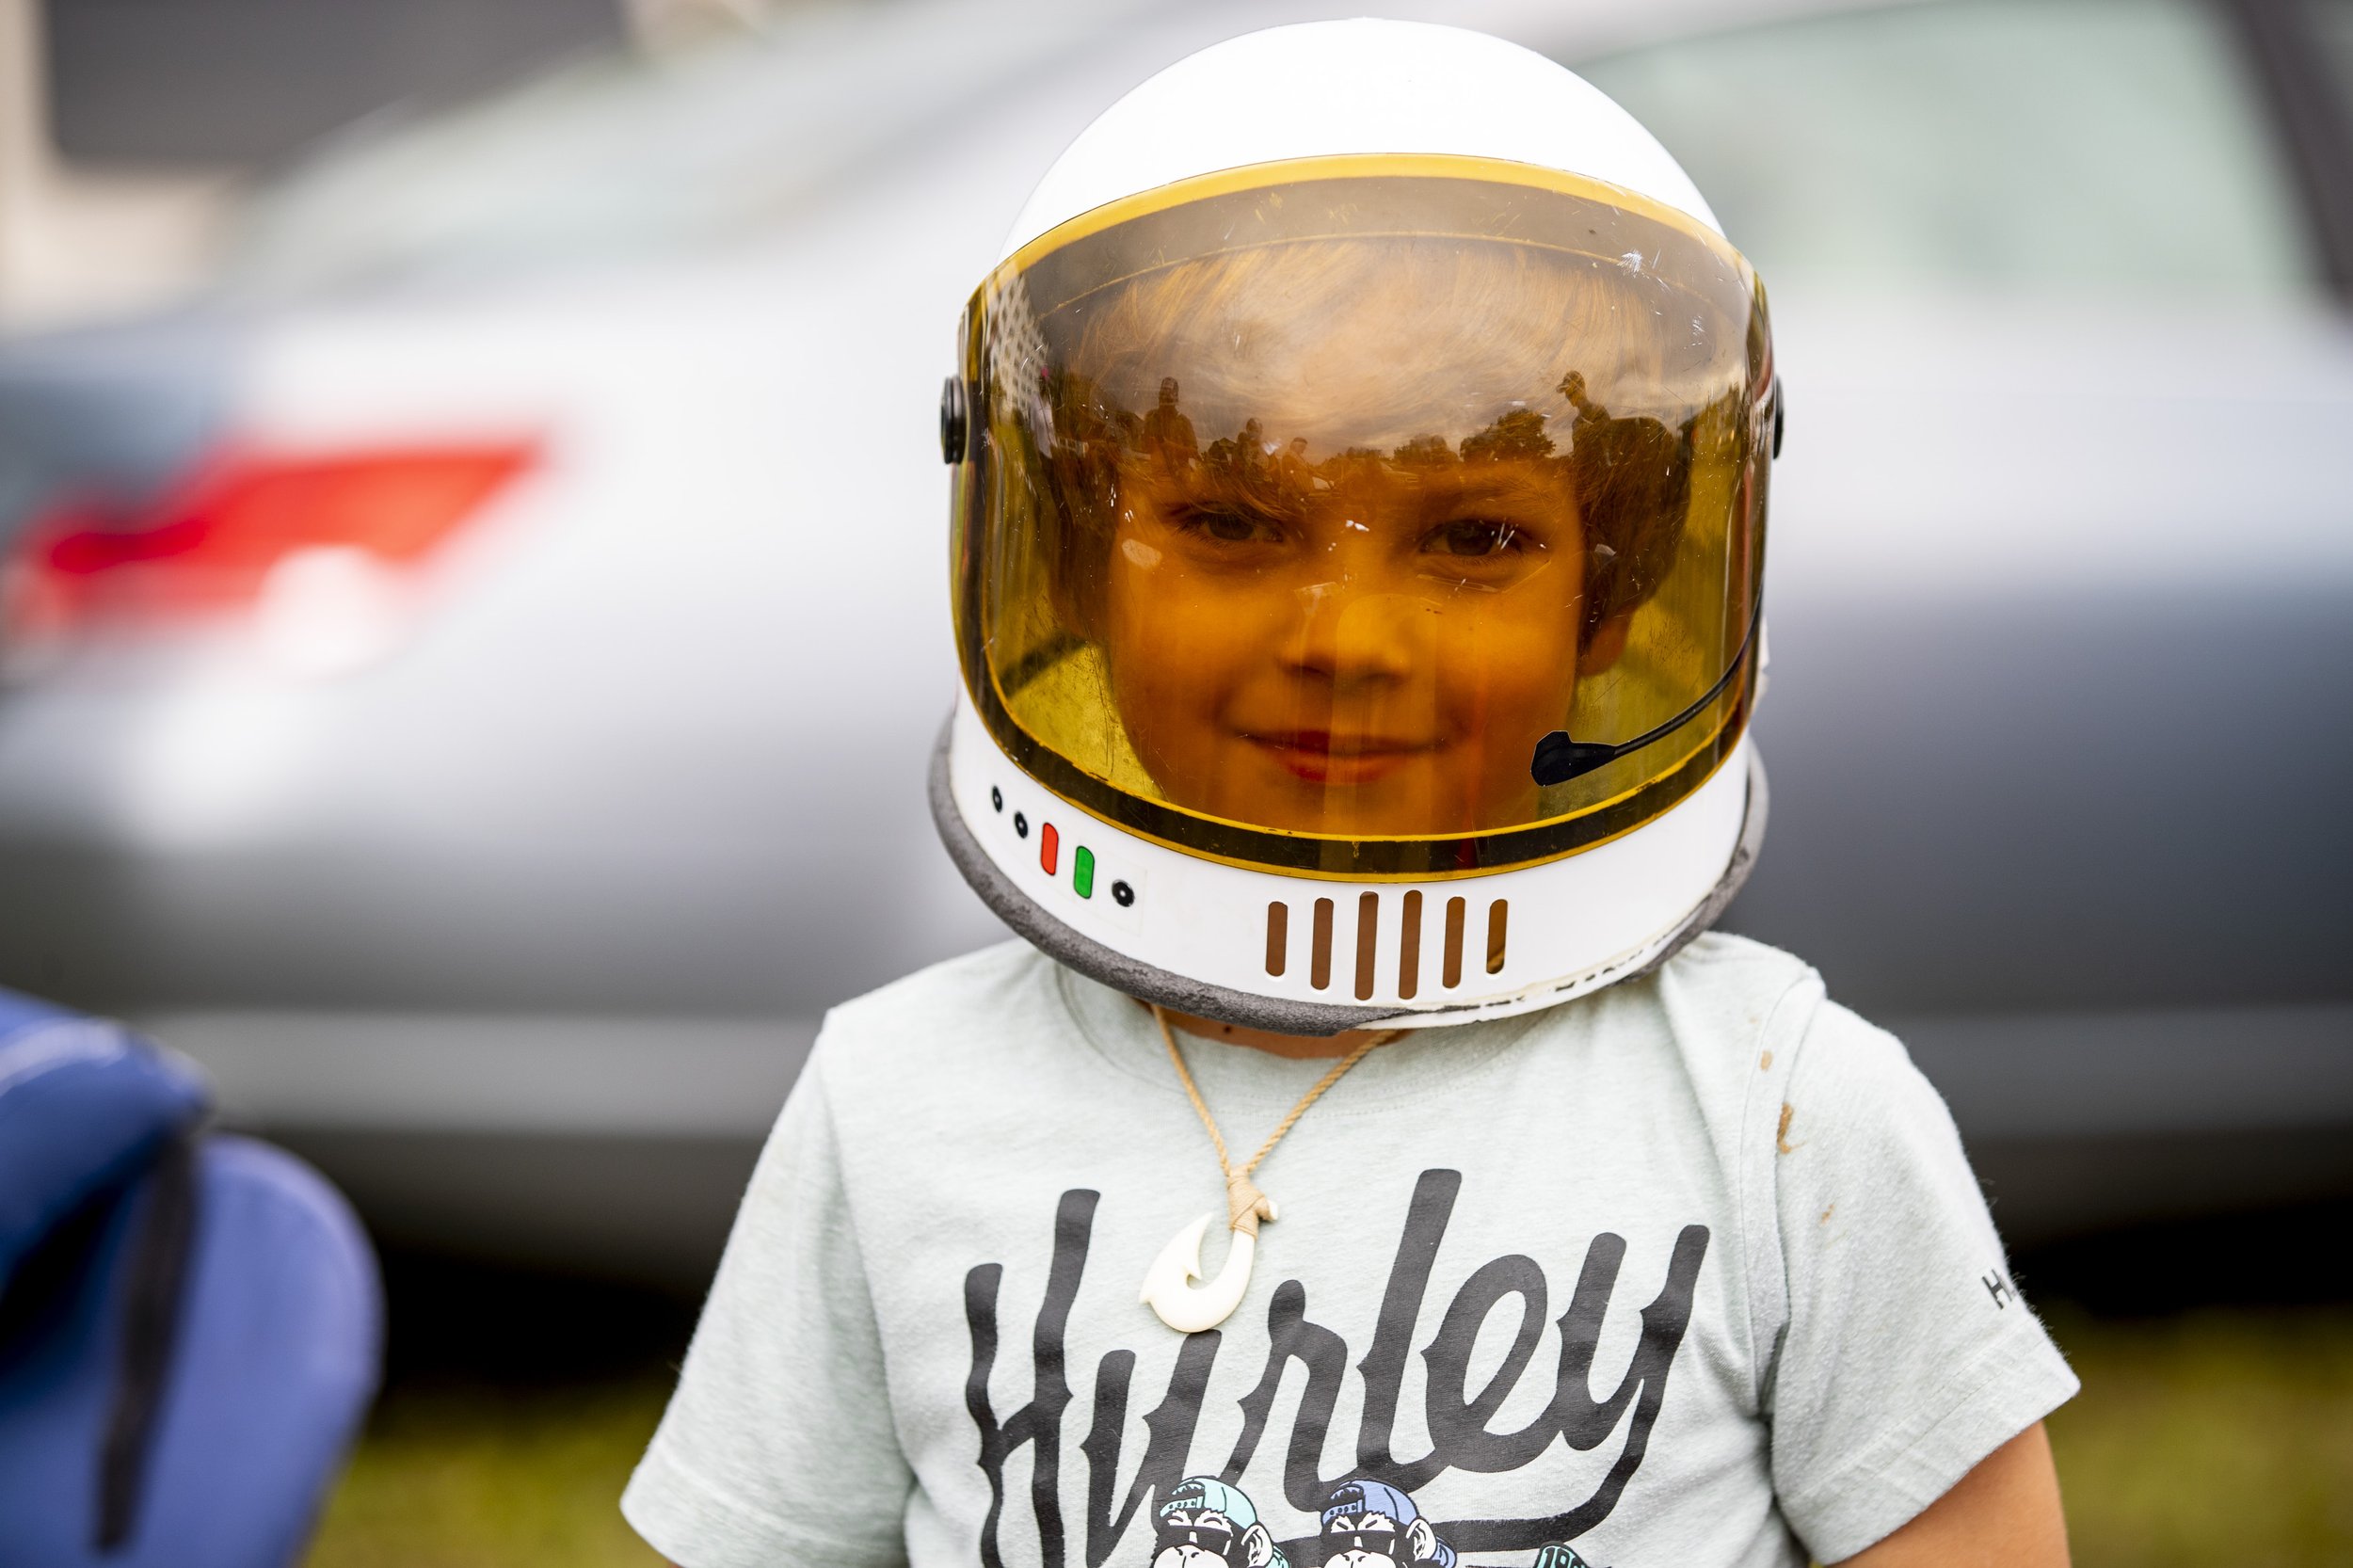  Reef Luman, 6, of Jacksonville, dons his astronaut helmet ahead of the scheduled launch of SaceX's Crew Dragon capsule containing astronauts Bob Behnken and Doug Hurley in a field overlooking the Indian River in Titusville on Wednesday, May 27, 2020